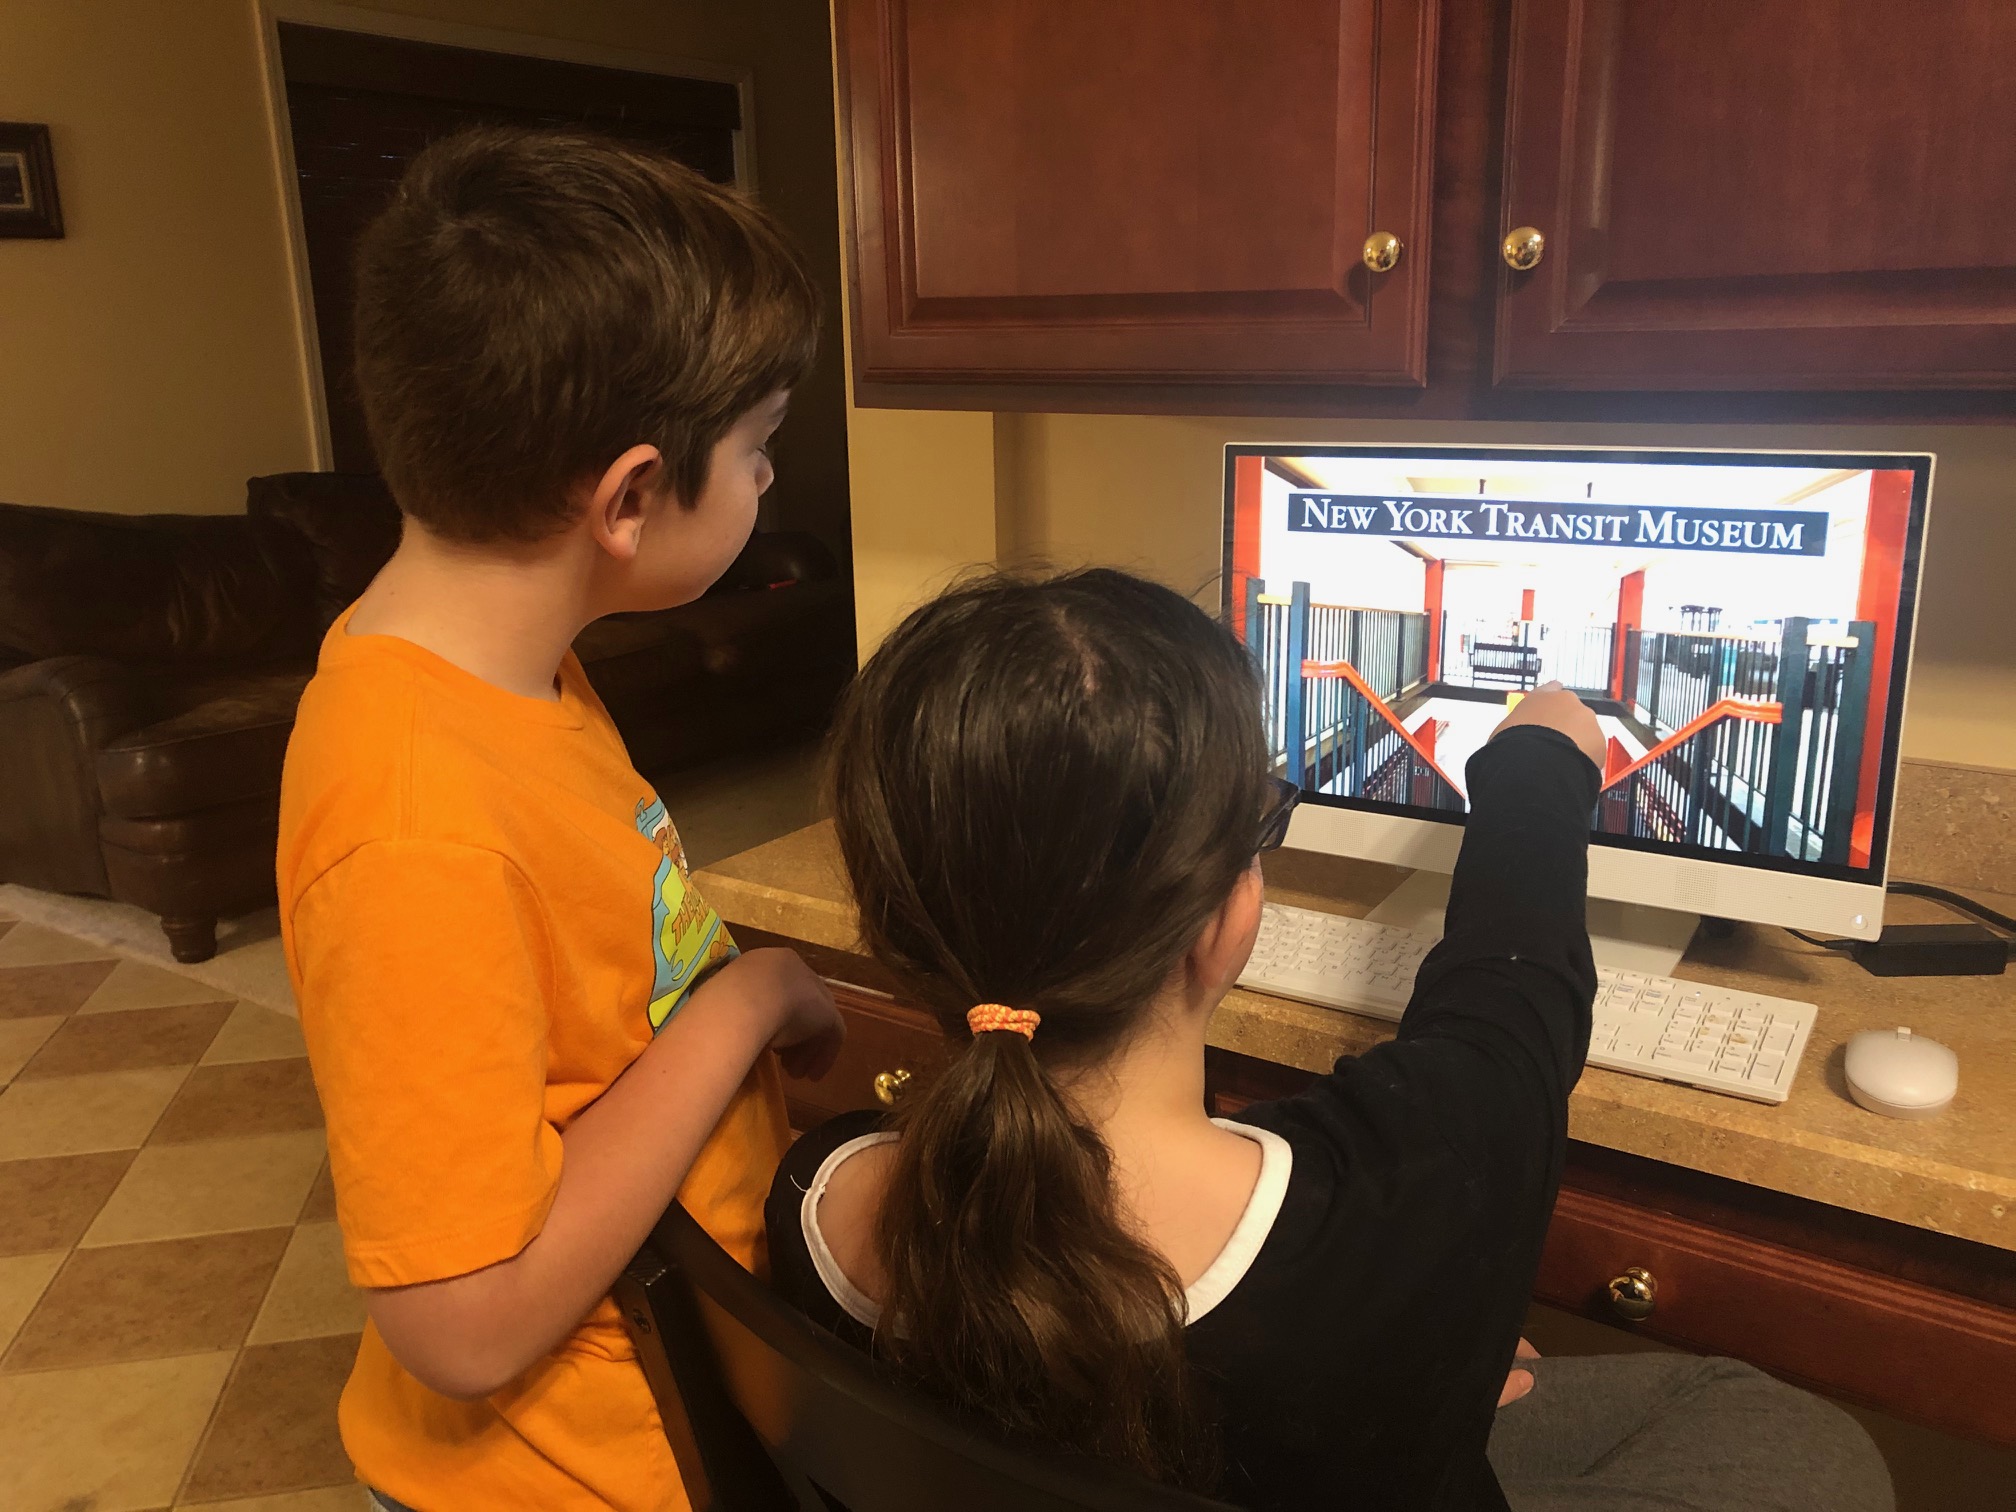 A brother and a sister engage with a virtual museum program on a computer.